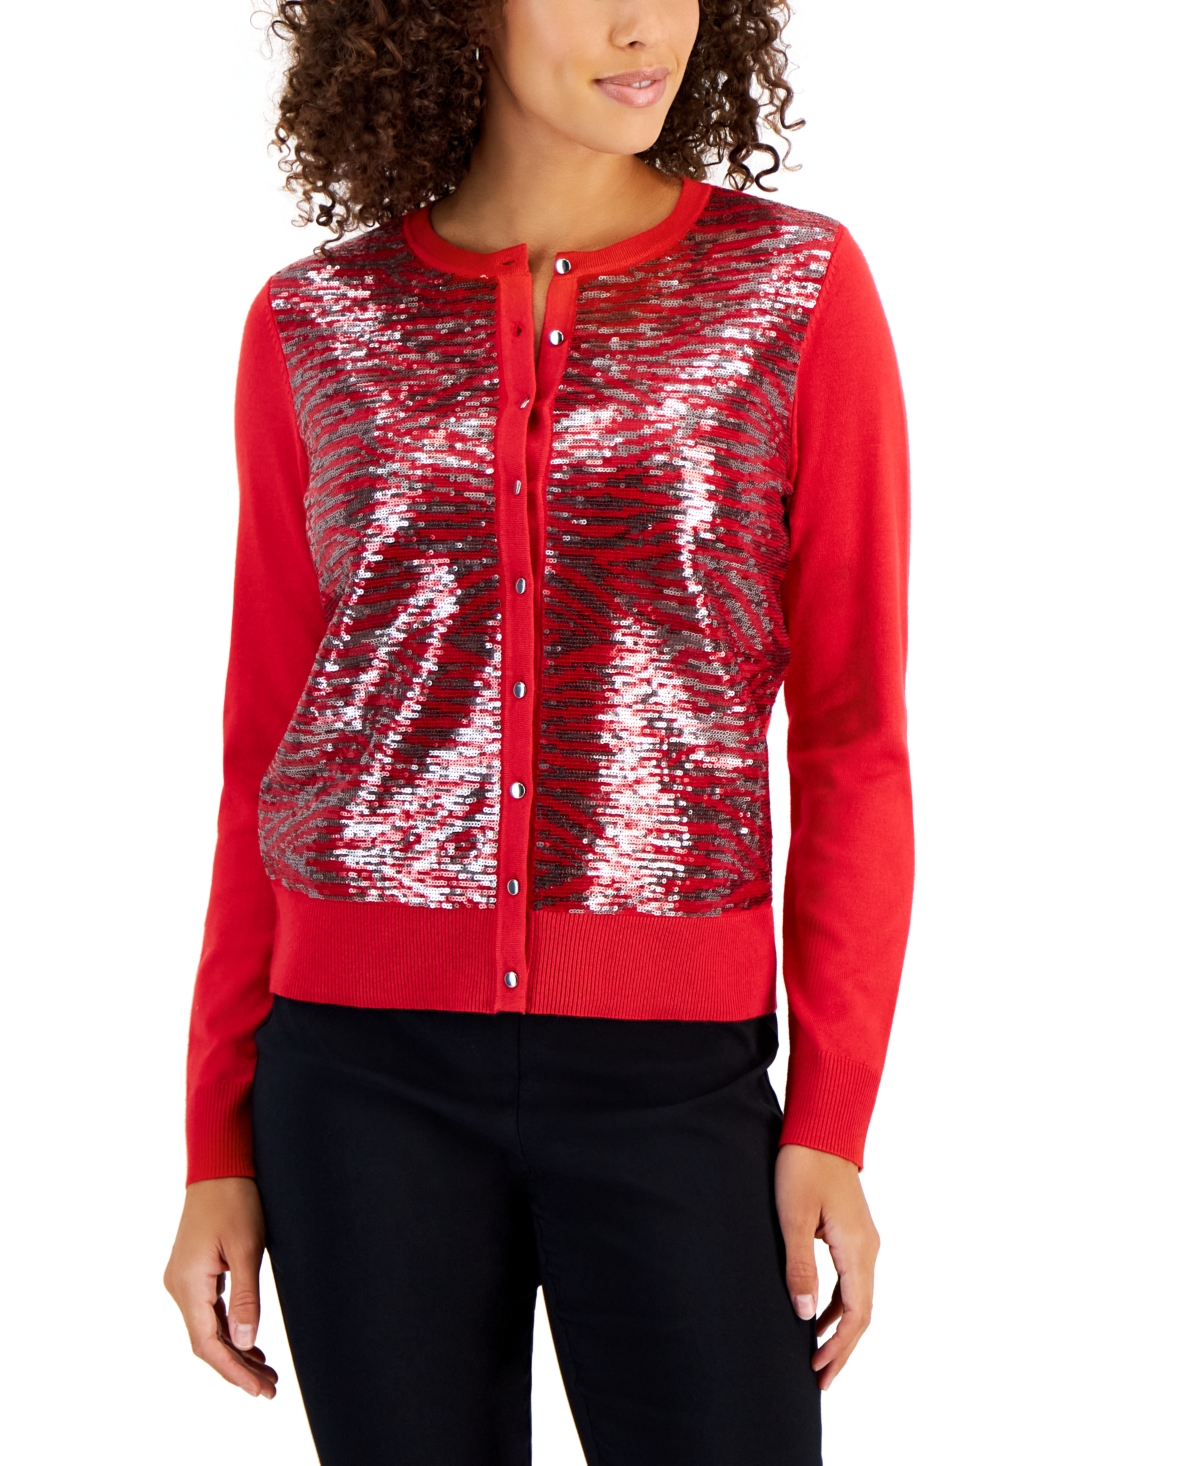 Jm Collection Women's Zebra Sequined Button Cardigan, Created for Macy's